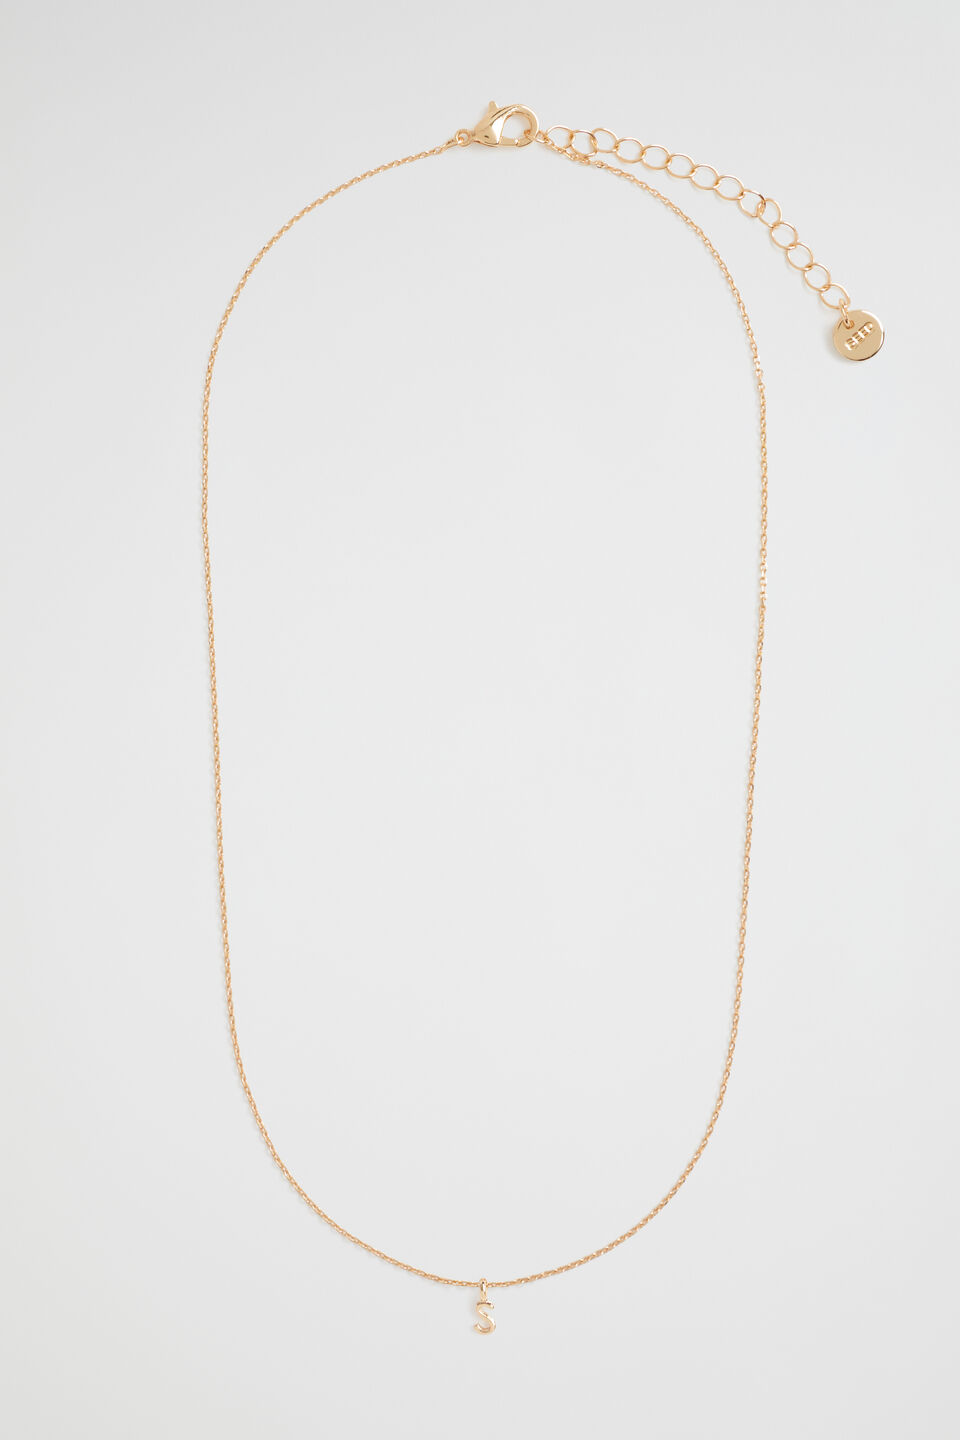 Gold Initial Necklace  S